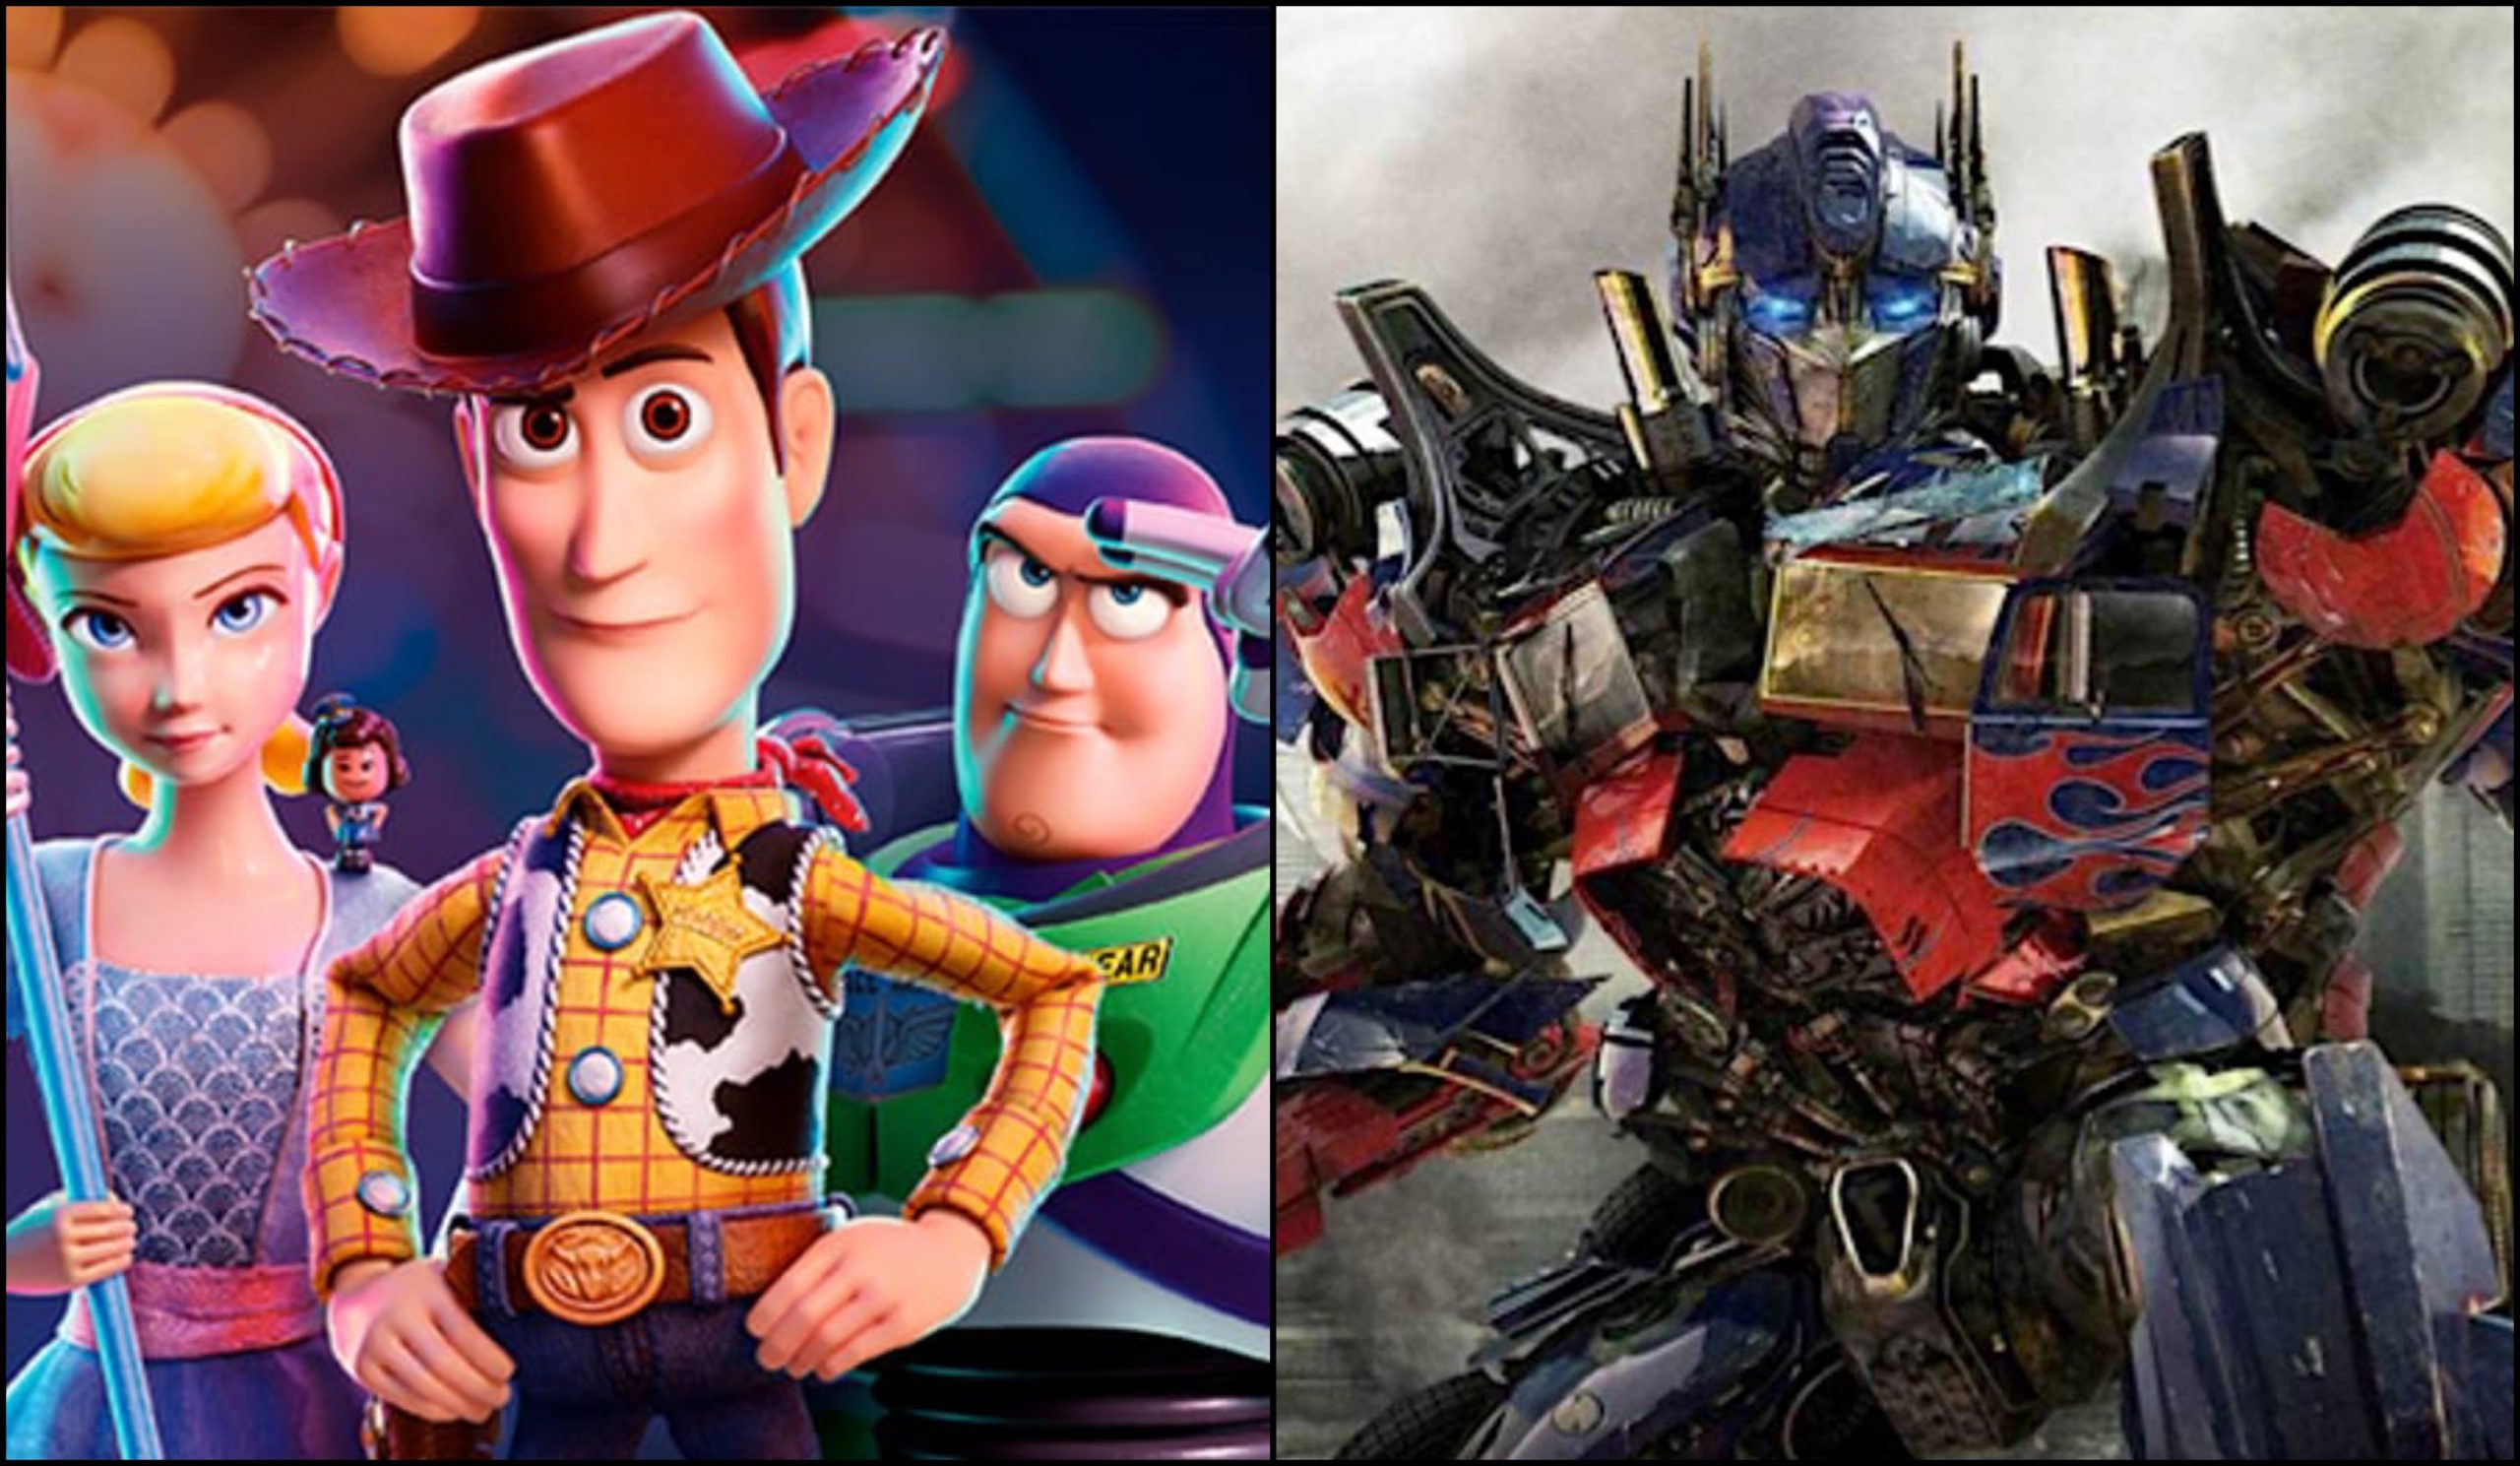 ‘Toy Story 4’ Director Tapped to Direct New ‘Transformers’ Animated Film